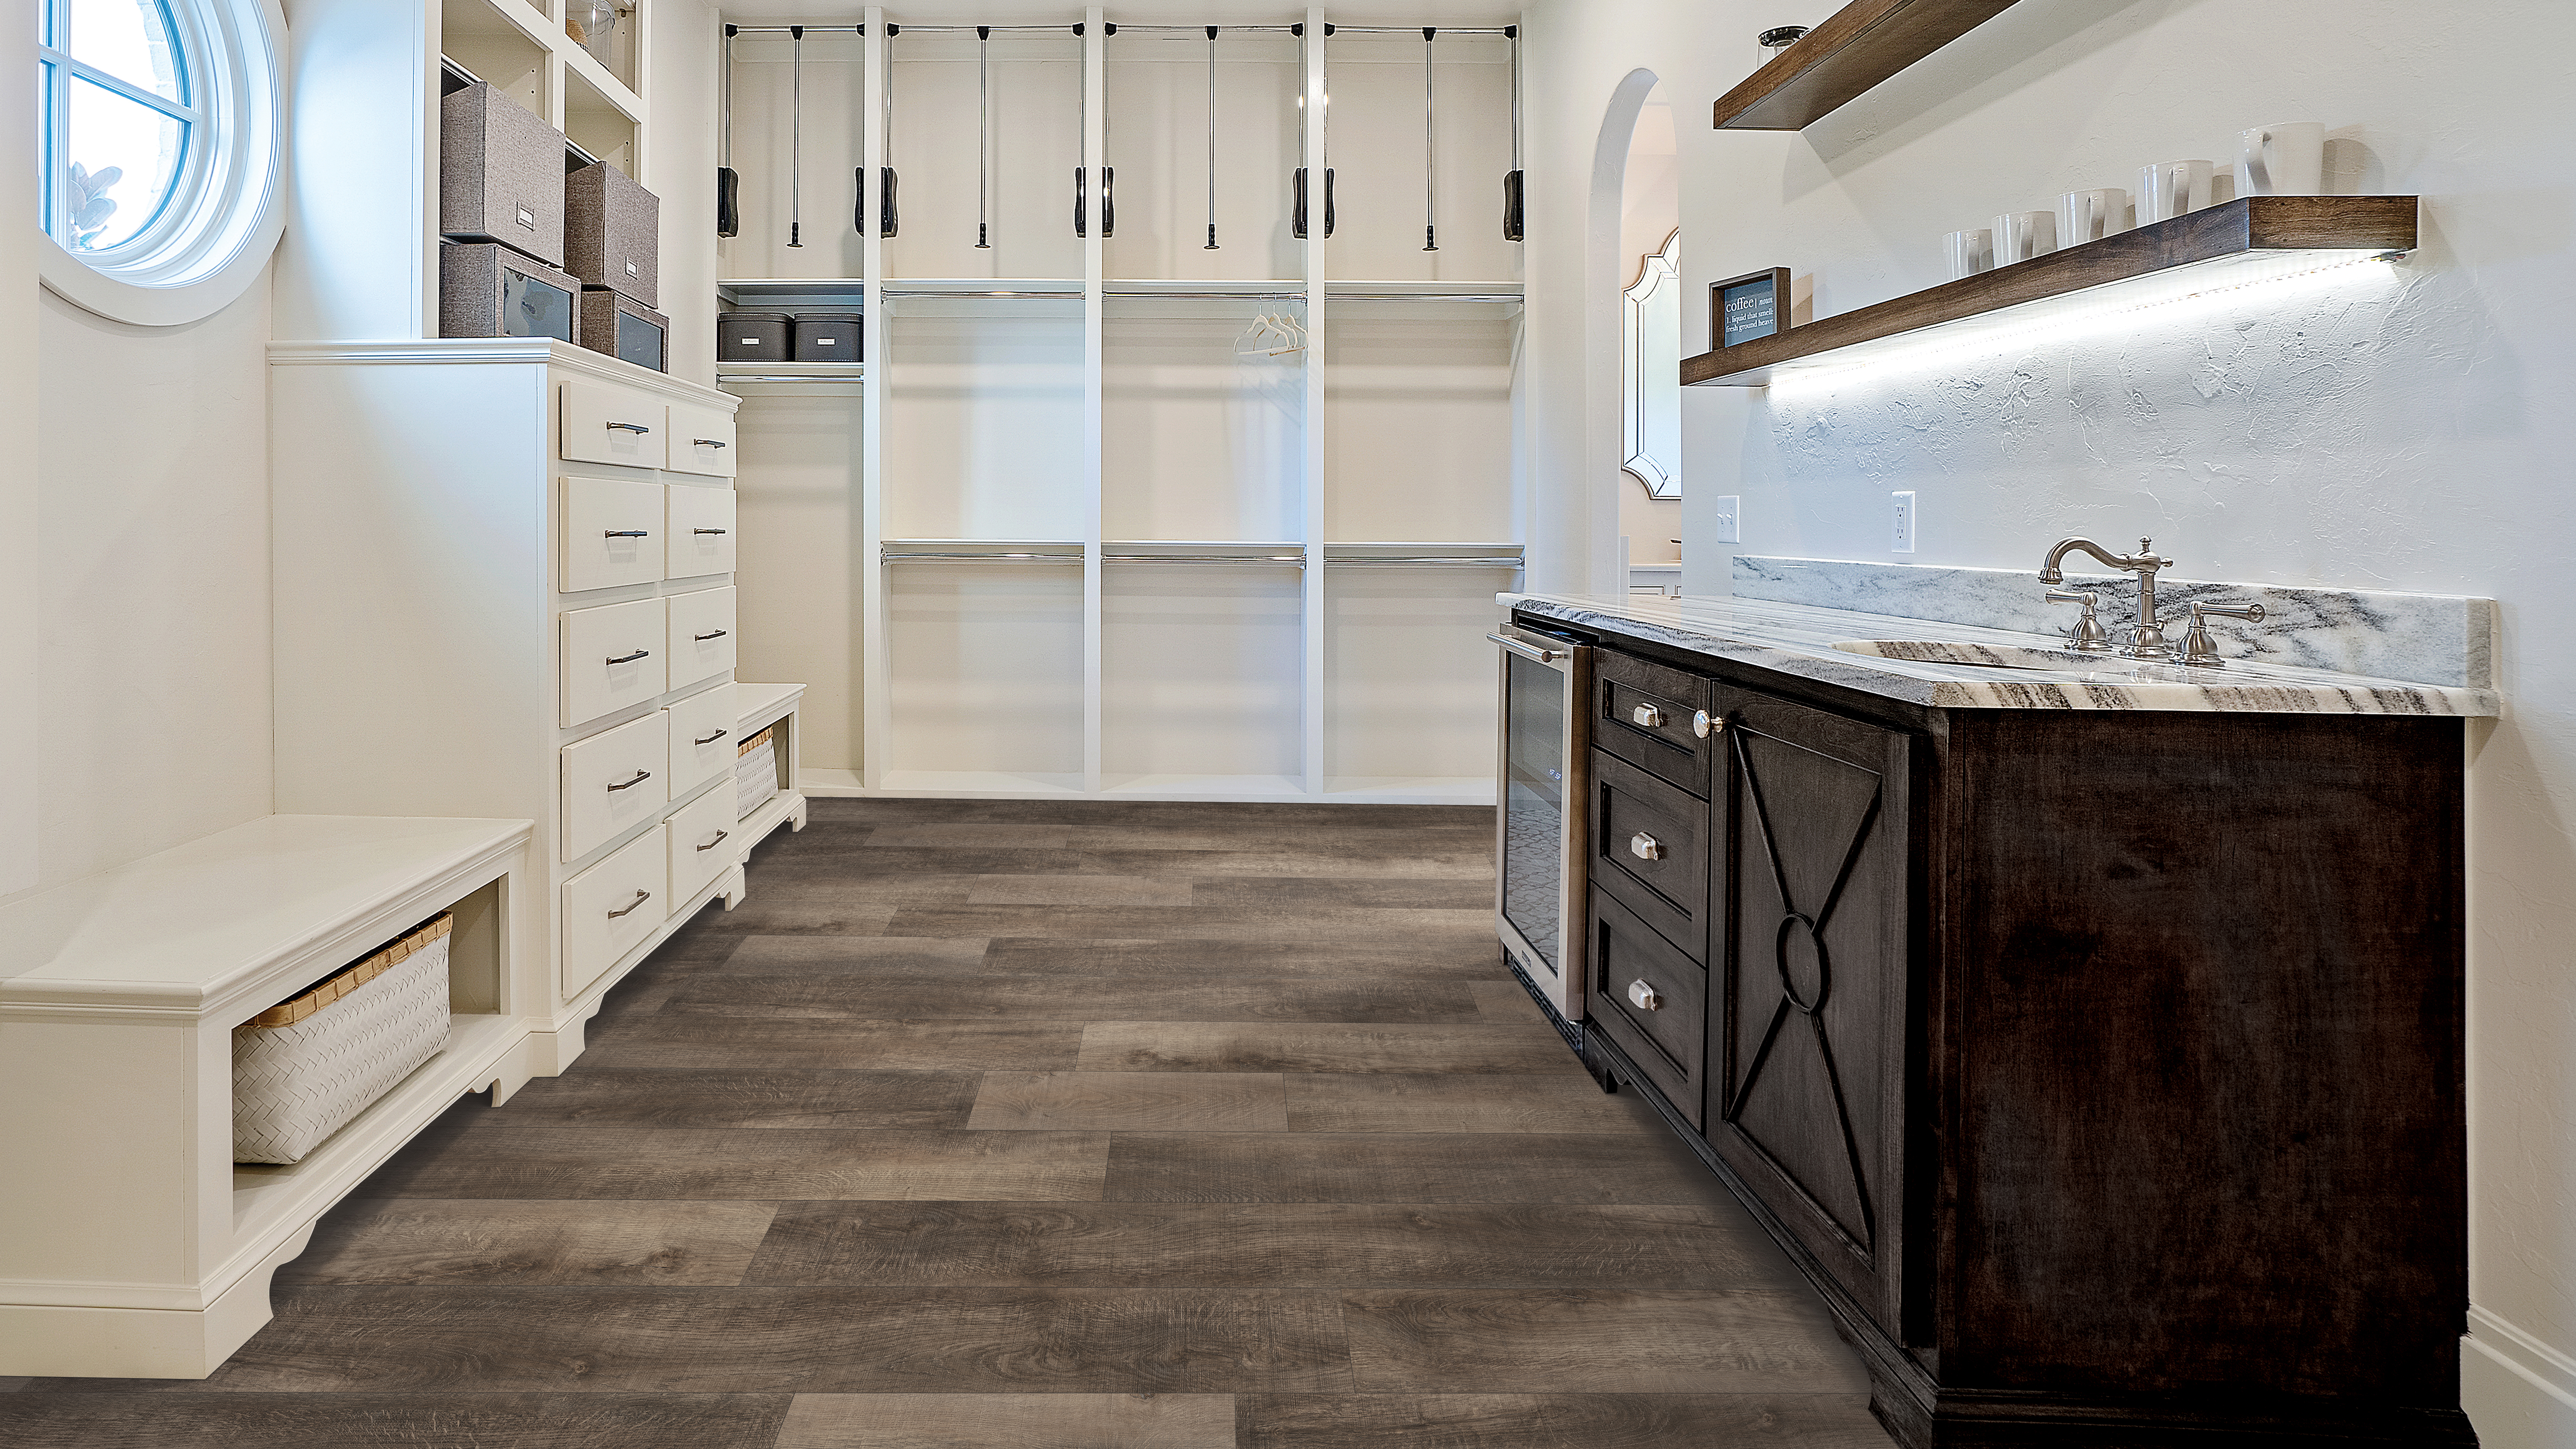 Luxury vinyl flooring in a laundry room, installation services available.